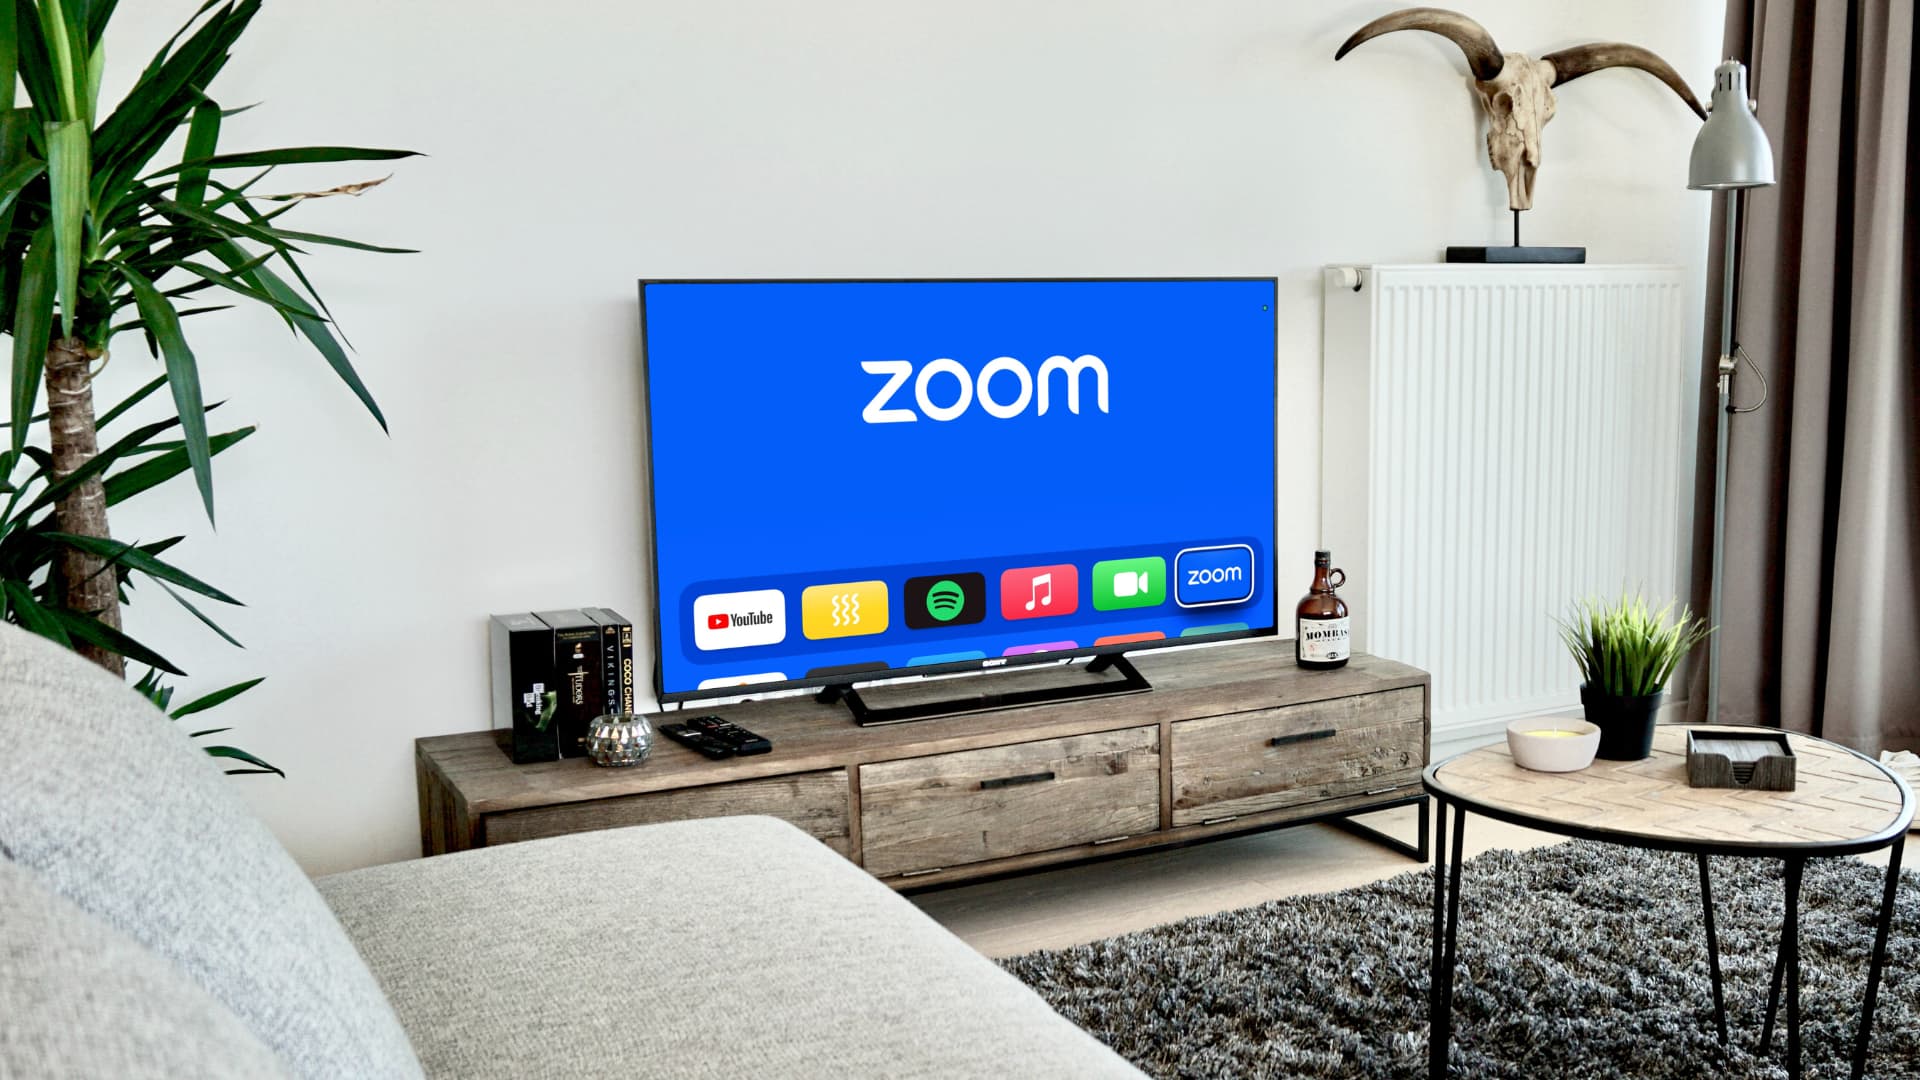 How to video call using Zoom on Apple TV